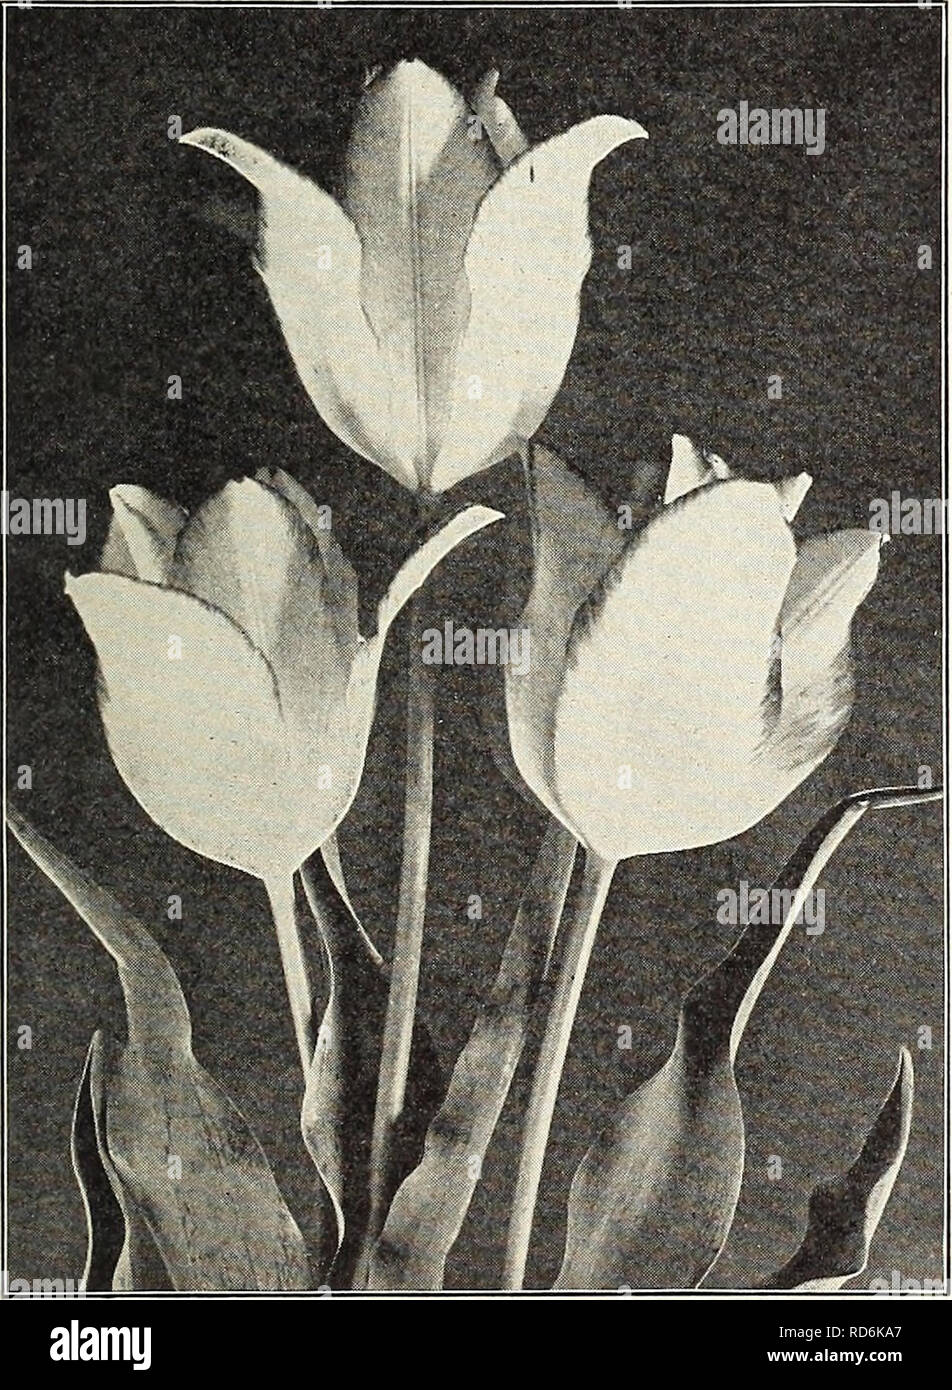 . Currie's bulbs and plants : autumn 1926. Flowers Seeds Catalogs; Bulbs (Plants) Seeds Catalogs; Nurseries (Horticulture) Catalogs; Plants, Ornamental Catalogs. CURRIE BROS. CO. AUTUMN CATALOGUE, 1926 Early Double Flowering Tulips Each Doz. 100 1000 c 8 Boule de Neige (Snowball)—Fine large, pure, double white S .09 S .85 S6.25 $46.00 c 8 Cochineal—Large vermillion scarlet. .. .08 .80 6.00 44.00 c 9 Couronne des Roses—Finest Rose 09 .85 6.25 48.00 b 10 Couronne d'Or—Orange 08 .80 6.00 46.00 b 6 Due Van Tholl—Red and yellow 08 .80 6.00 44.00 c 8 Duke of York—A lovely violet, white bordered 09 . Stock Photo